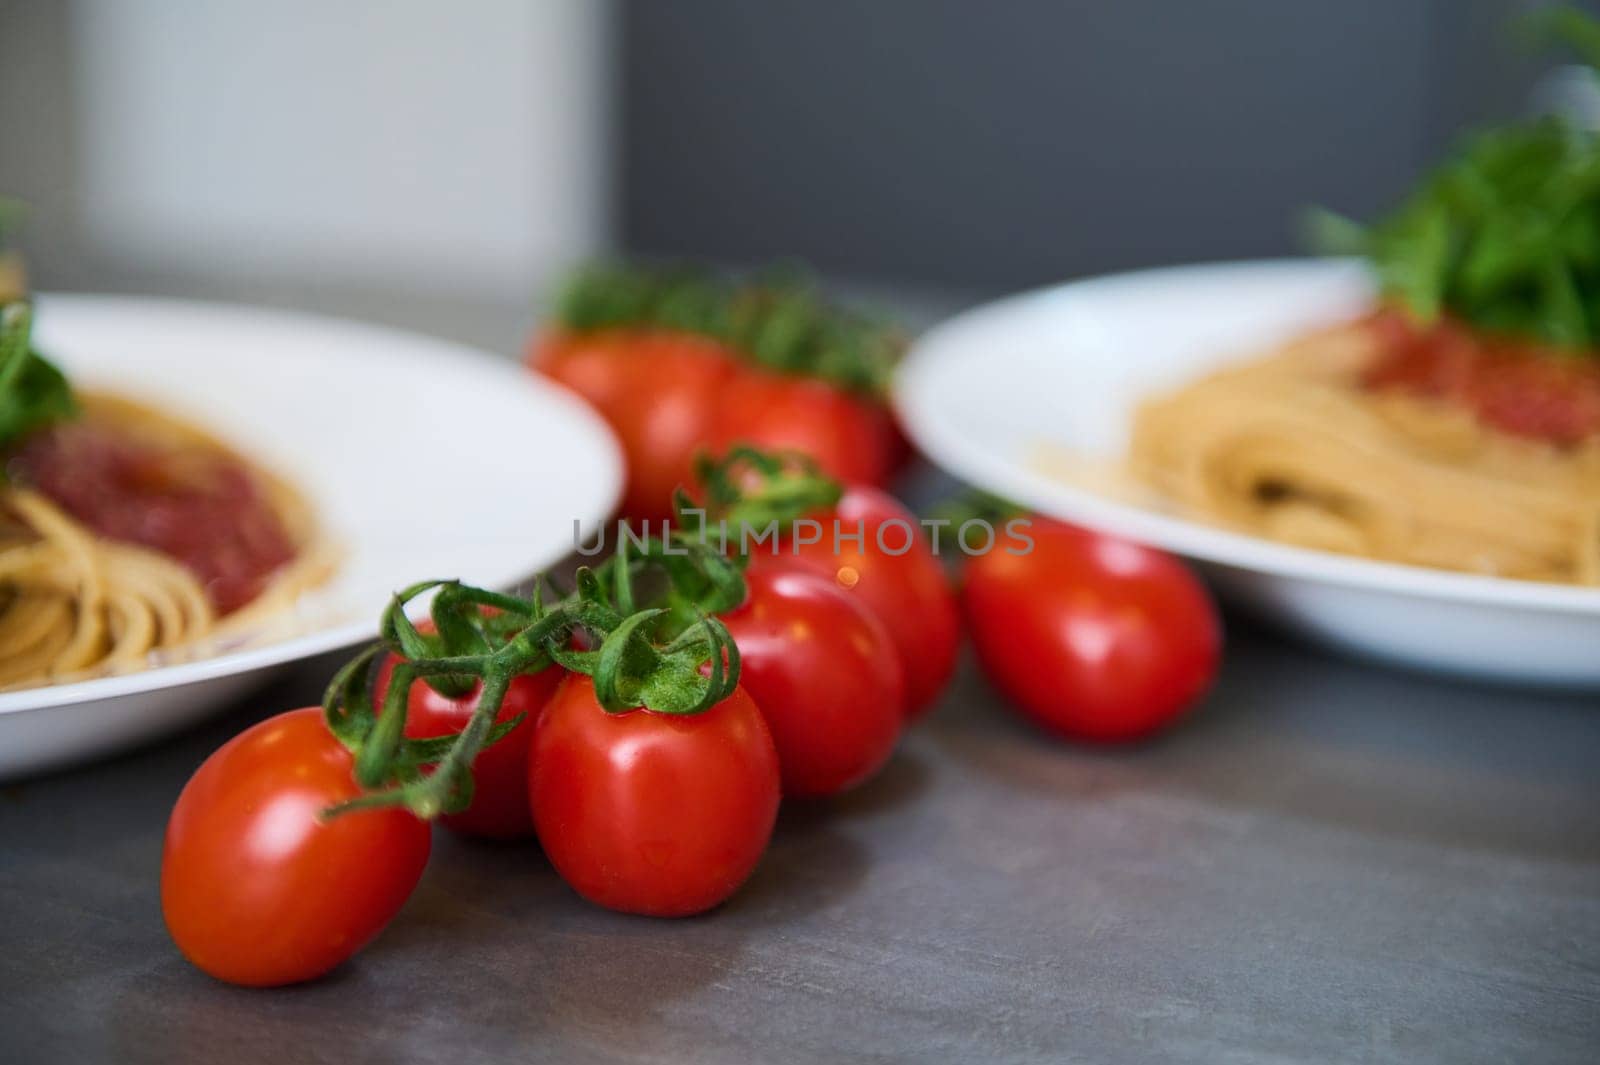 Selective focus on a bunch of red ripe organic tomatoes on the kitchen table, near two plates with Italian pasta. Food background. Still life